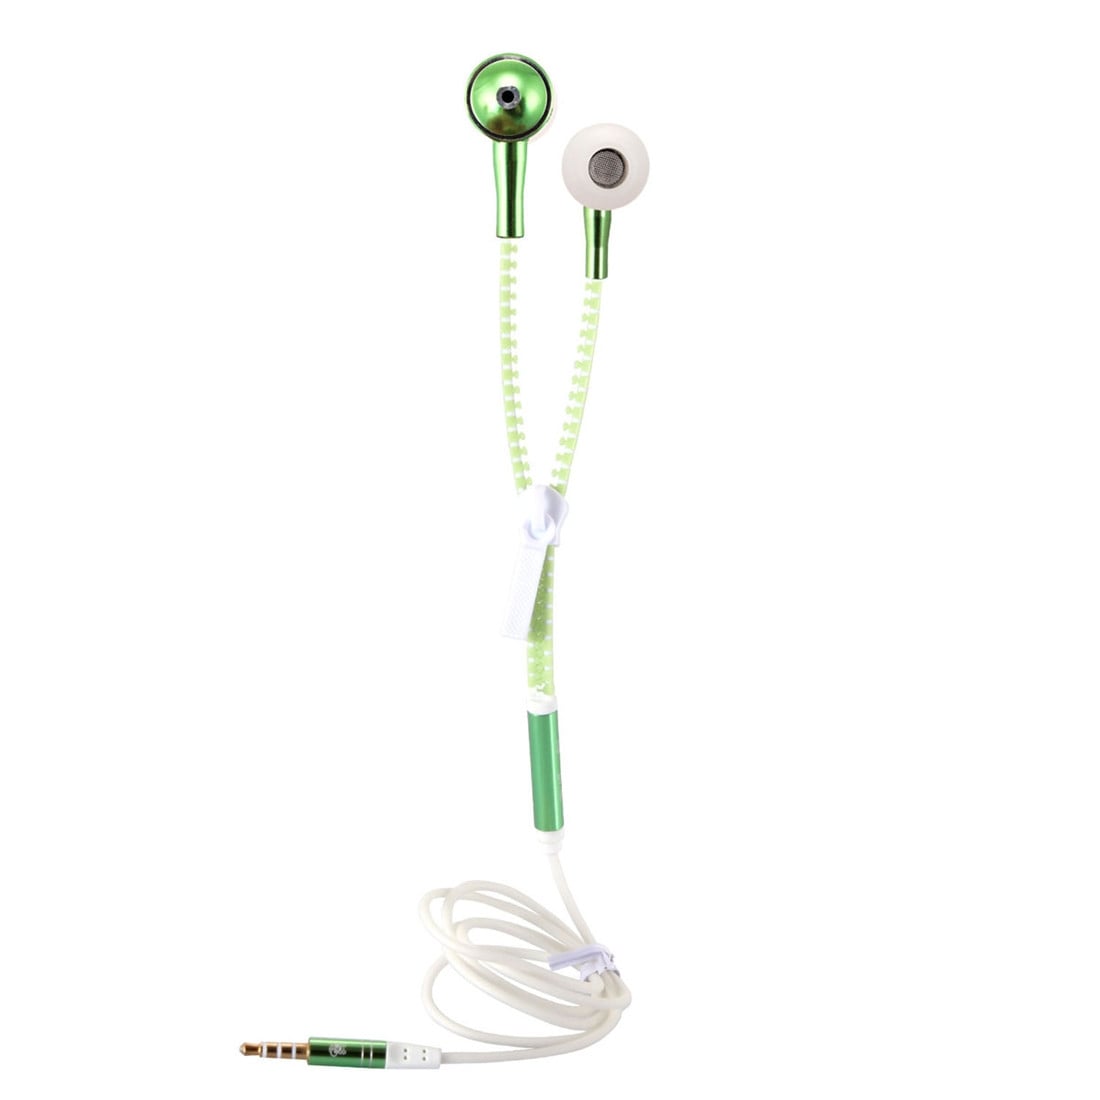 Selvlysende In-Ear Headset til iPhone, iPad, Samsung, HTC, Sony m.m.